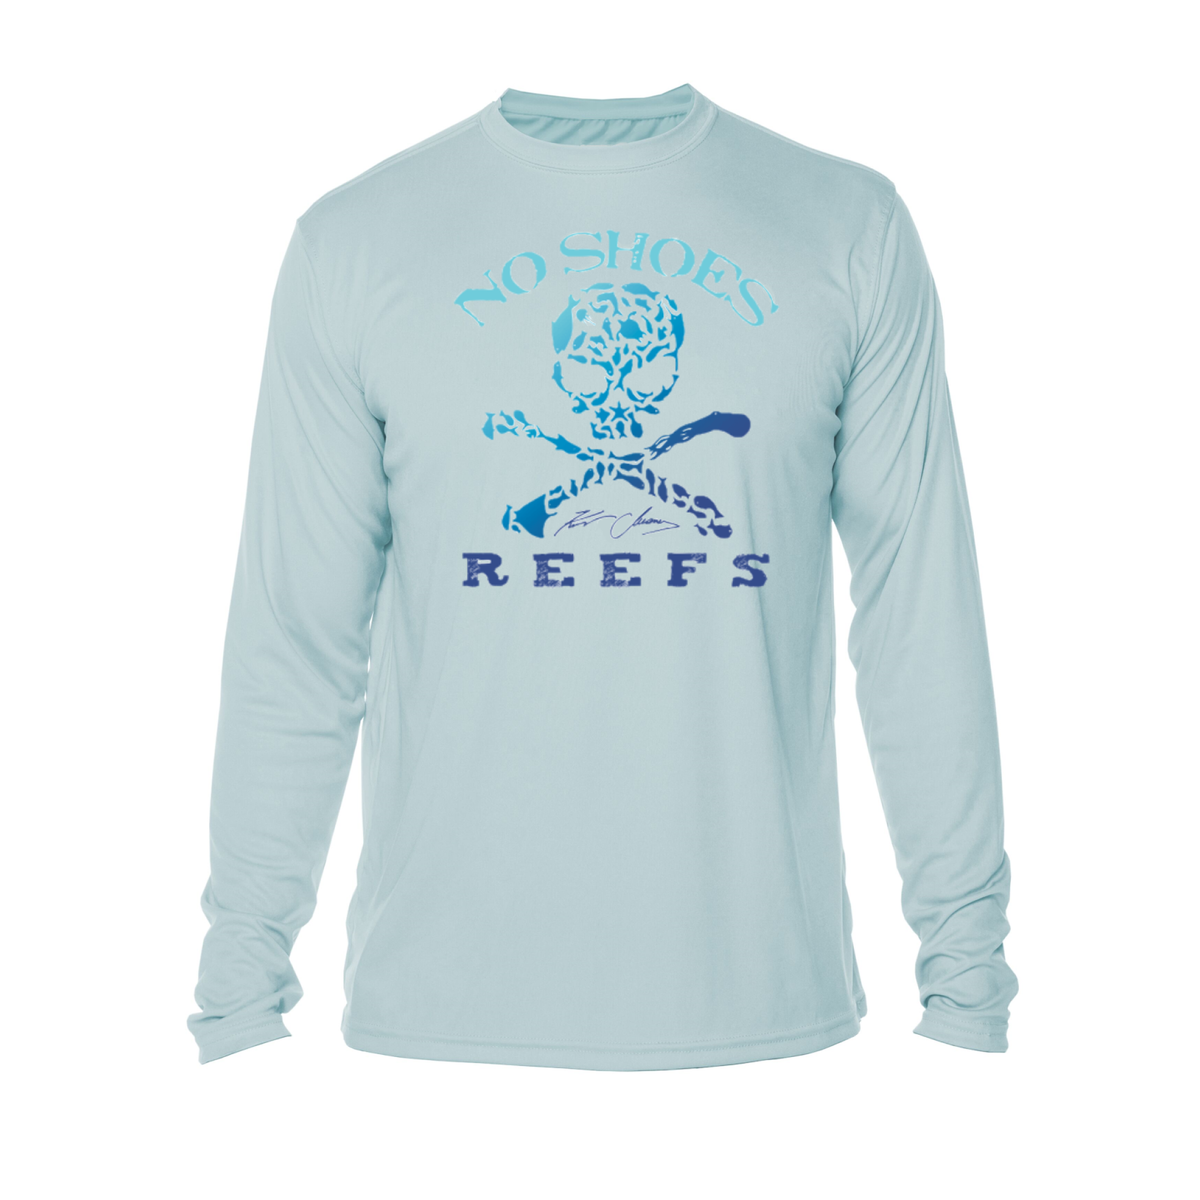 No Shoes Reefs - Repreve Long Sleeve Performance Tee - Artic Blue - SI